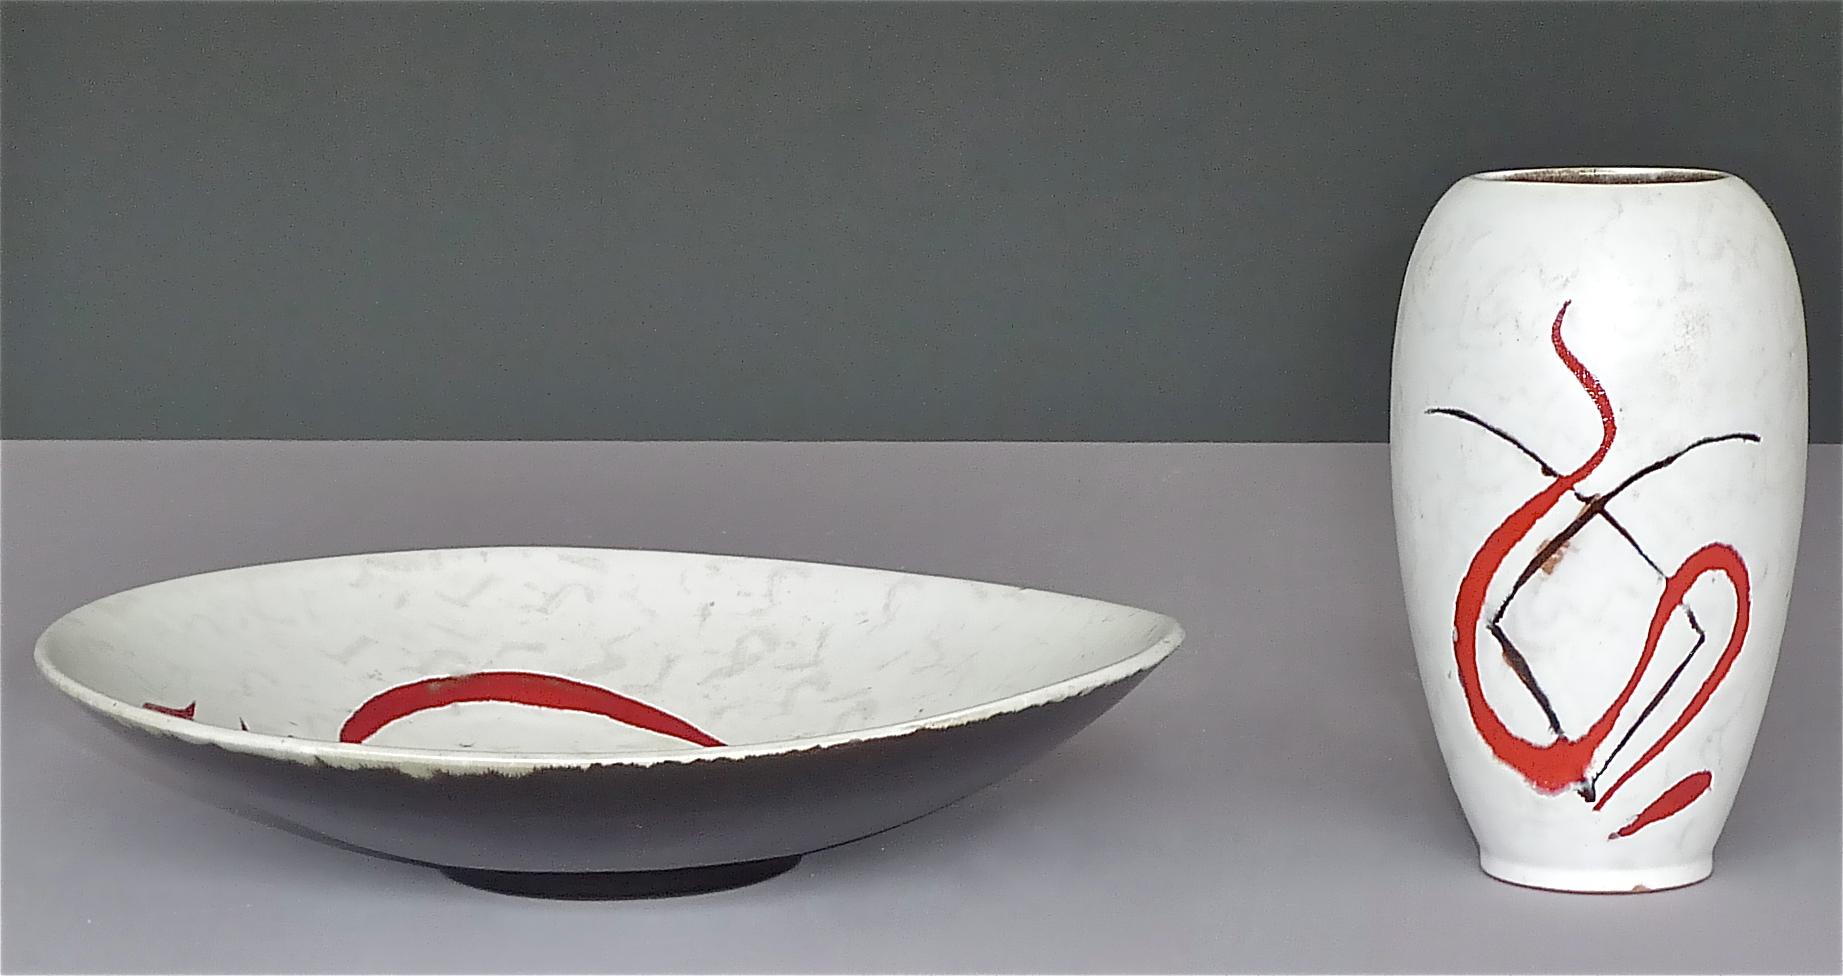 Abstract Midcentury Art Ceramic Vase and Bowl Gambone Miro Style White Red 1950s For Sale 4